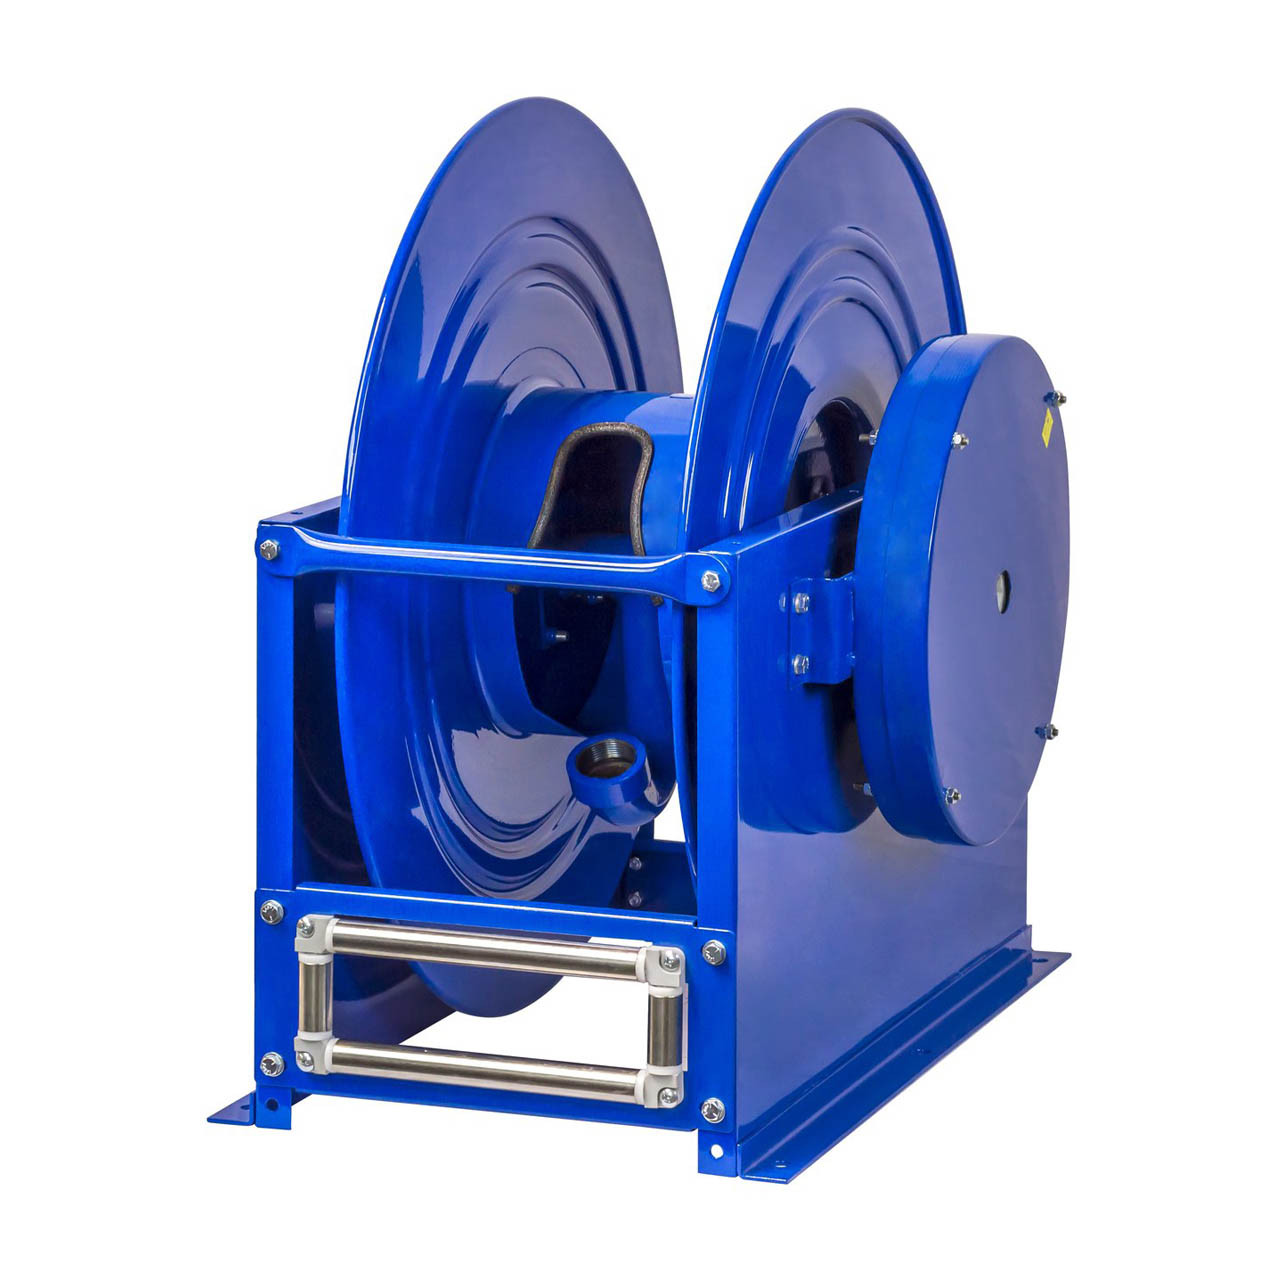 Cox Reels EZ-Coil hose reel for High Pressure Grease hose 1/4 inch X 100  Feet 5000 PSI (SAE 100R16) hose included